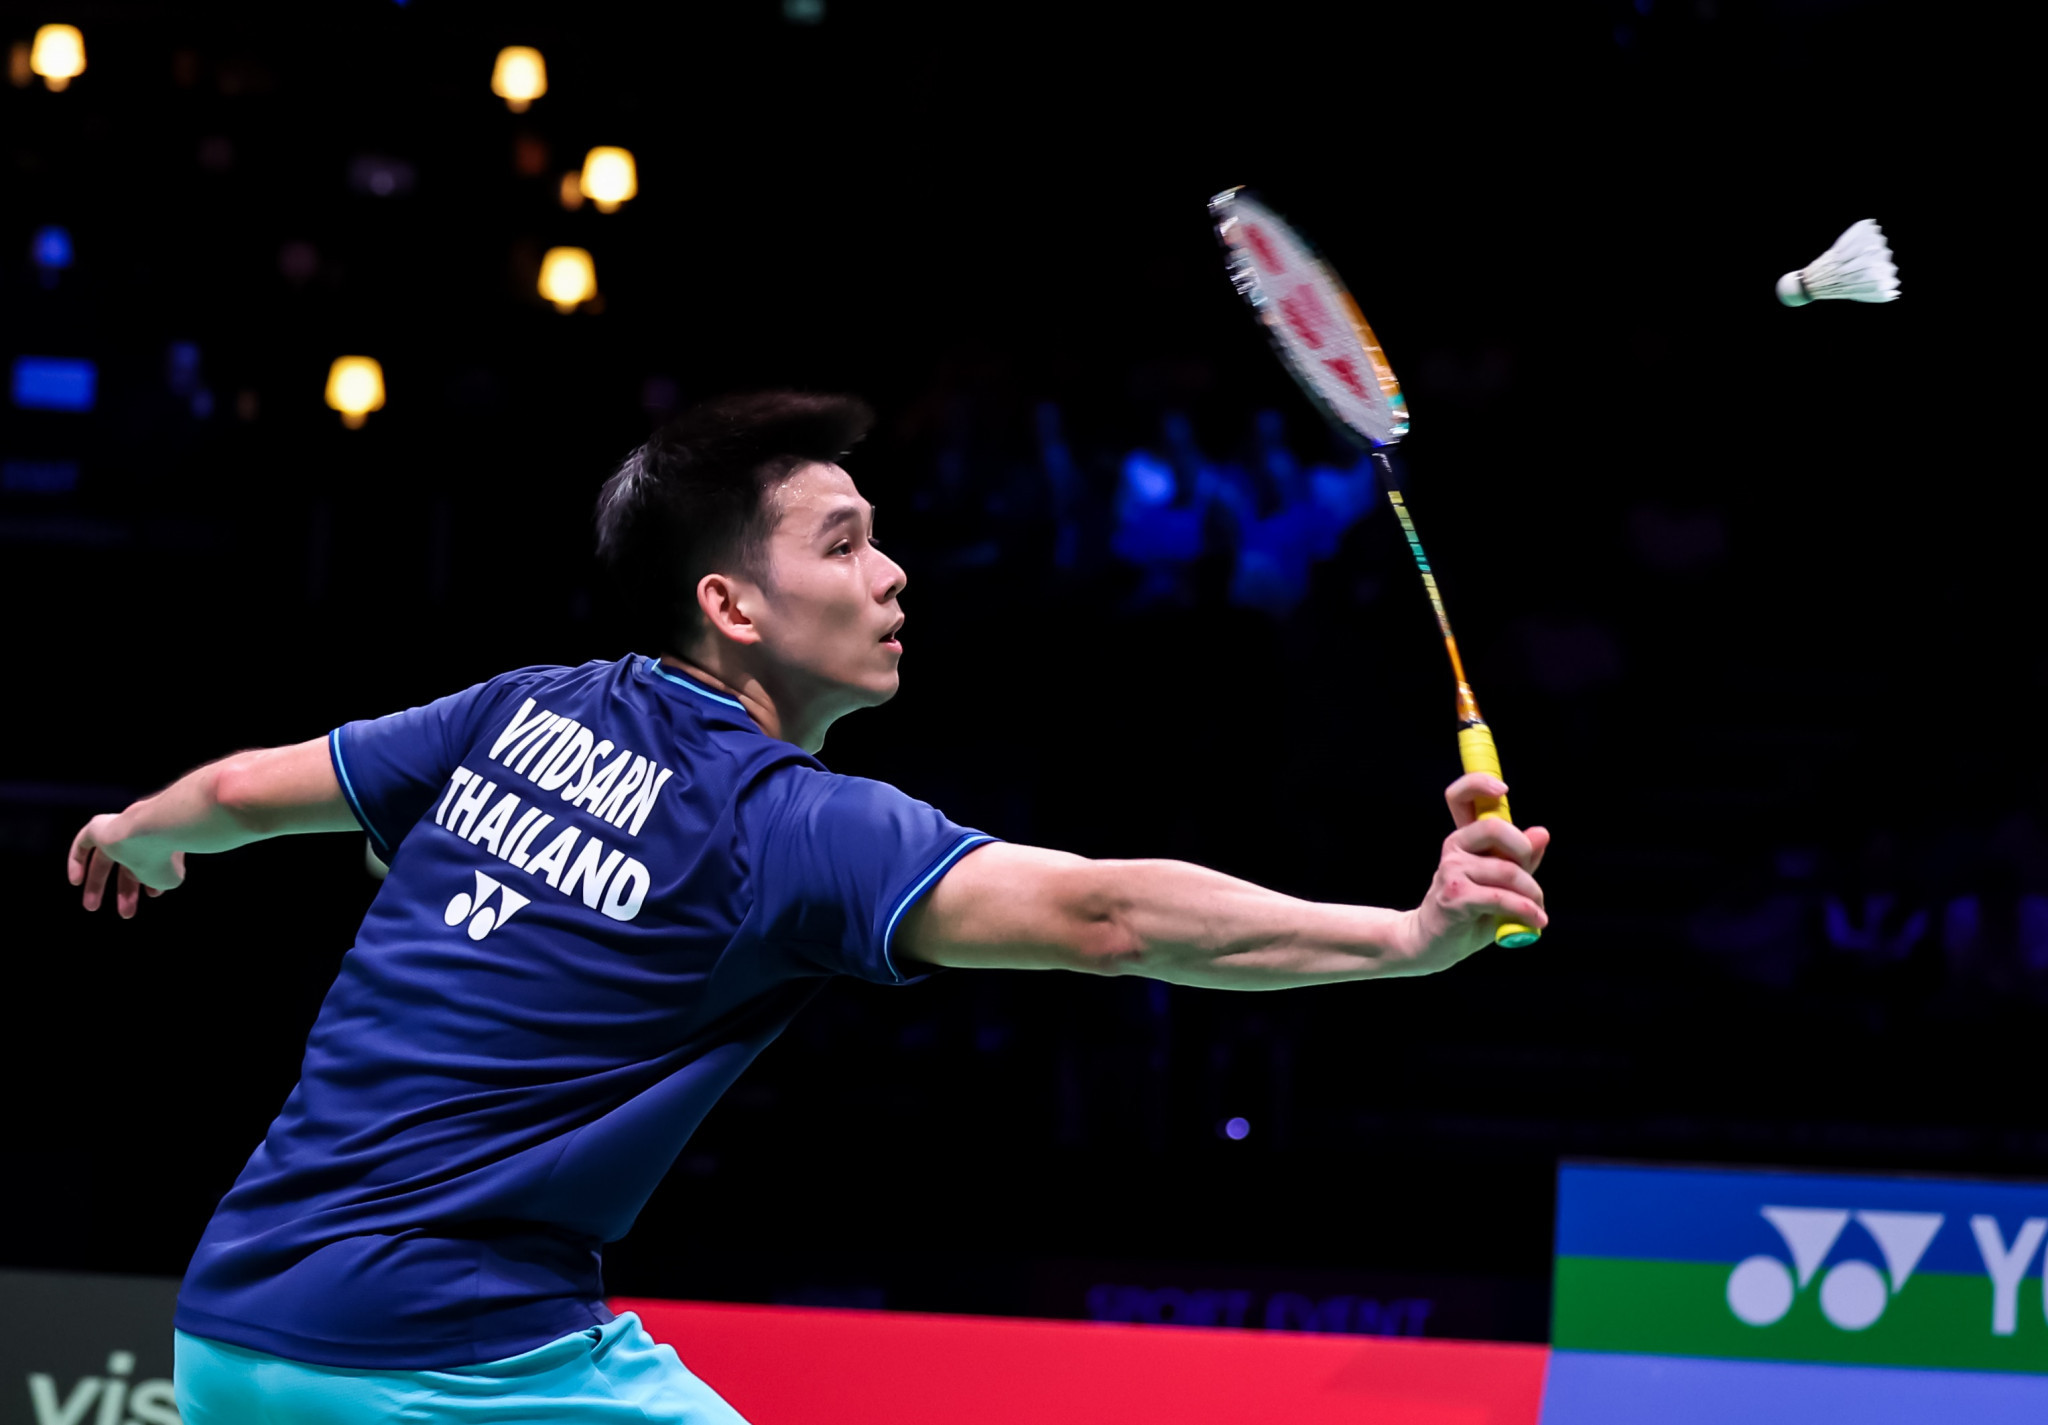 Thailand's Kunlavut Vitidsarn has made it into a second successive men's singles final as he eyes his first world title ©Badmintonphoto